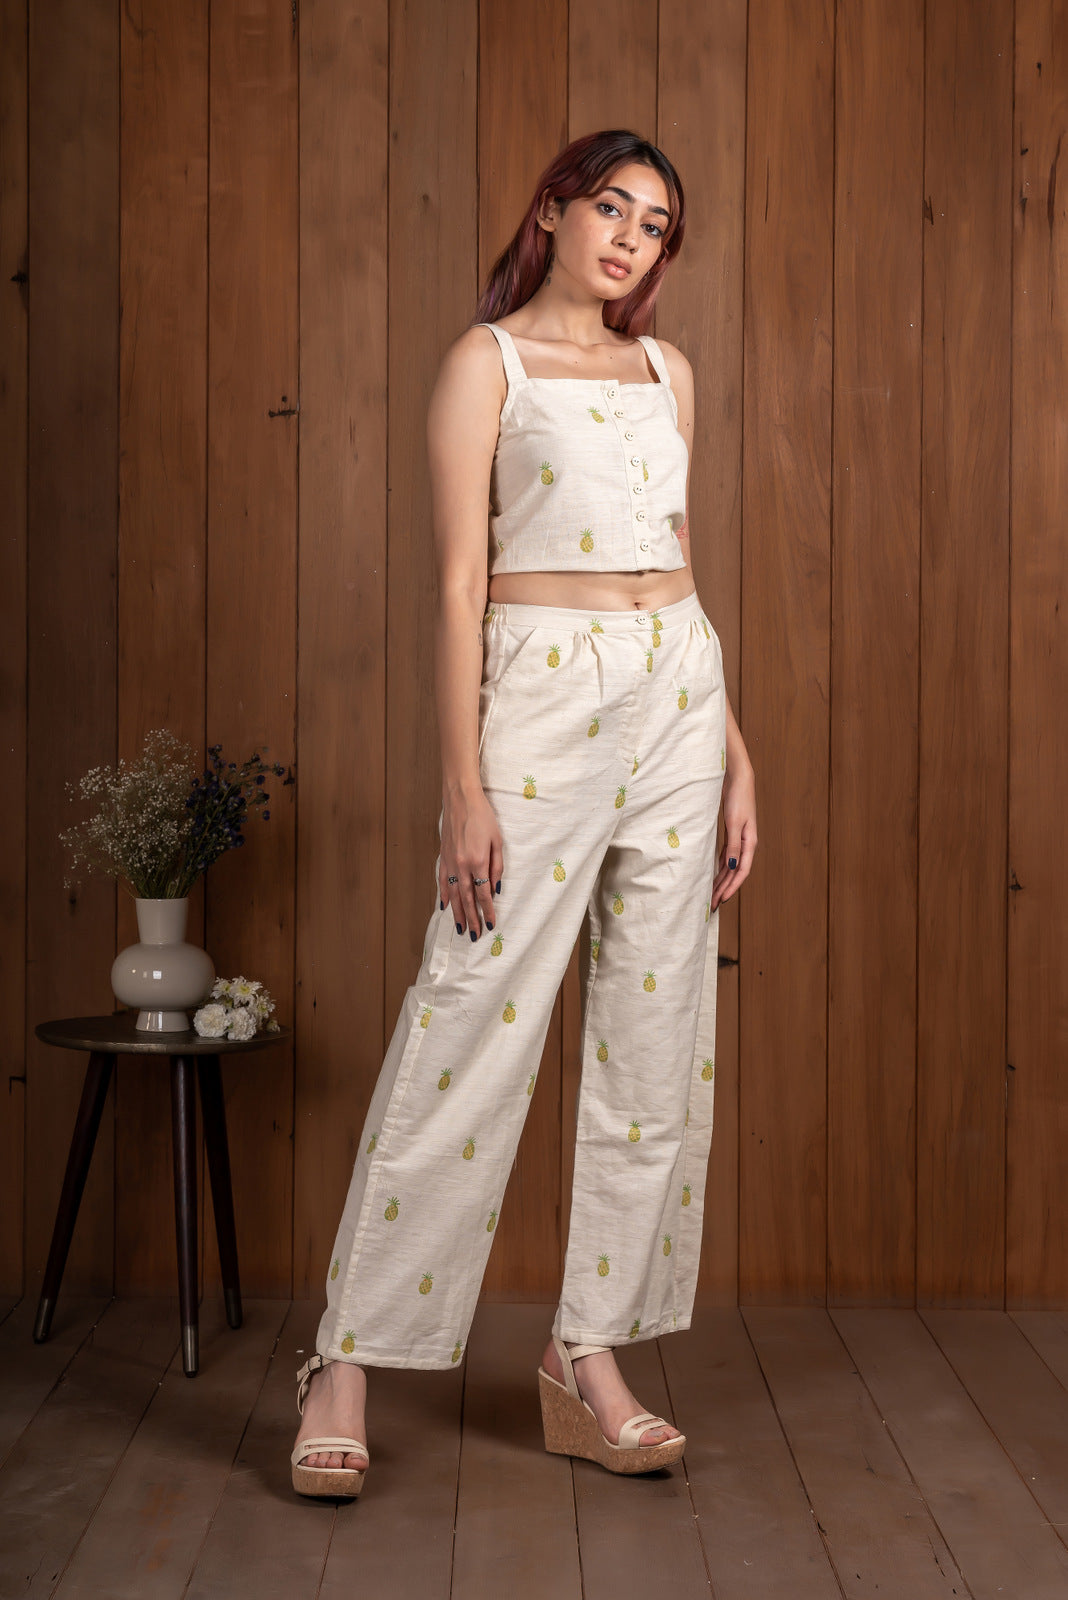 FableStreet  Tissue Polka Maxi Dress and Cotton Silk Cigarette Pants Coord  Made for compliments  group selfies Tap the link to shop  httpsbitly2FOHMAu  Facebook